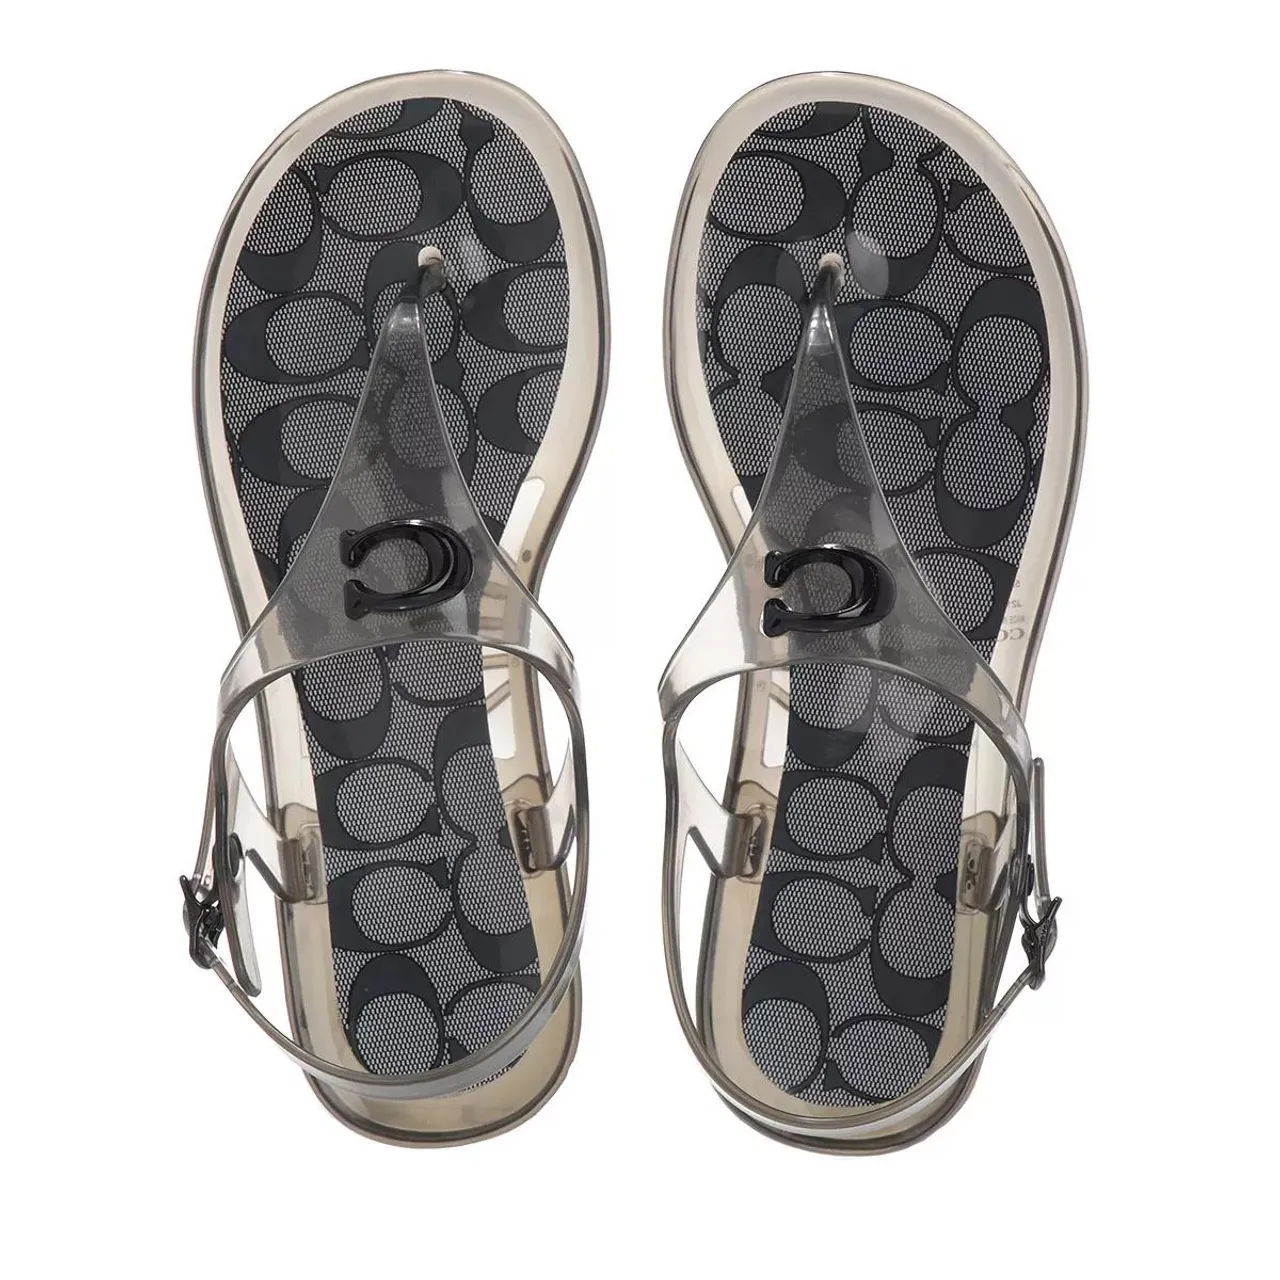 Coach Sandals - Natalee Jelly - black - Sandals for ladies